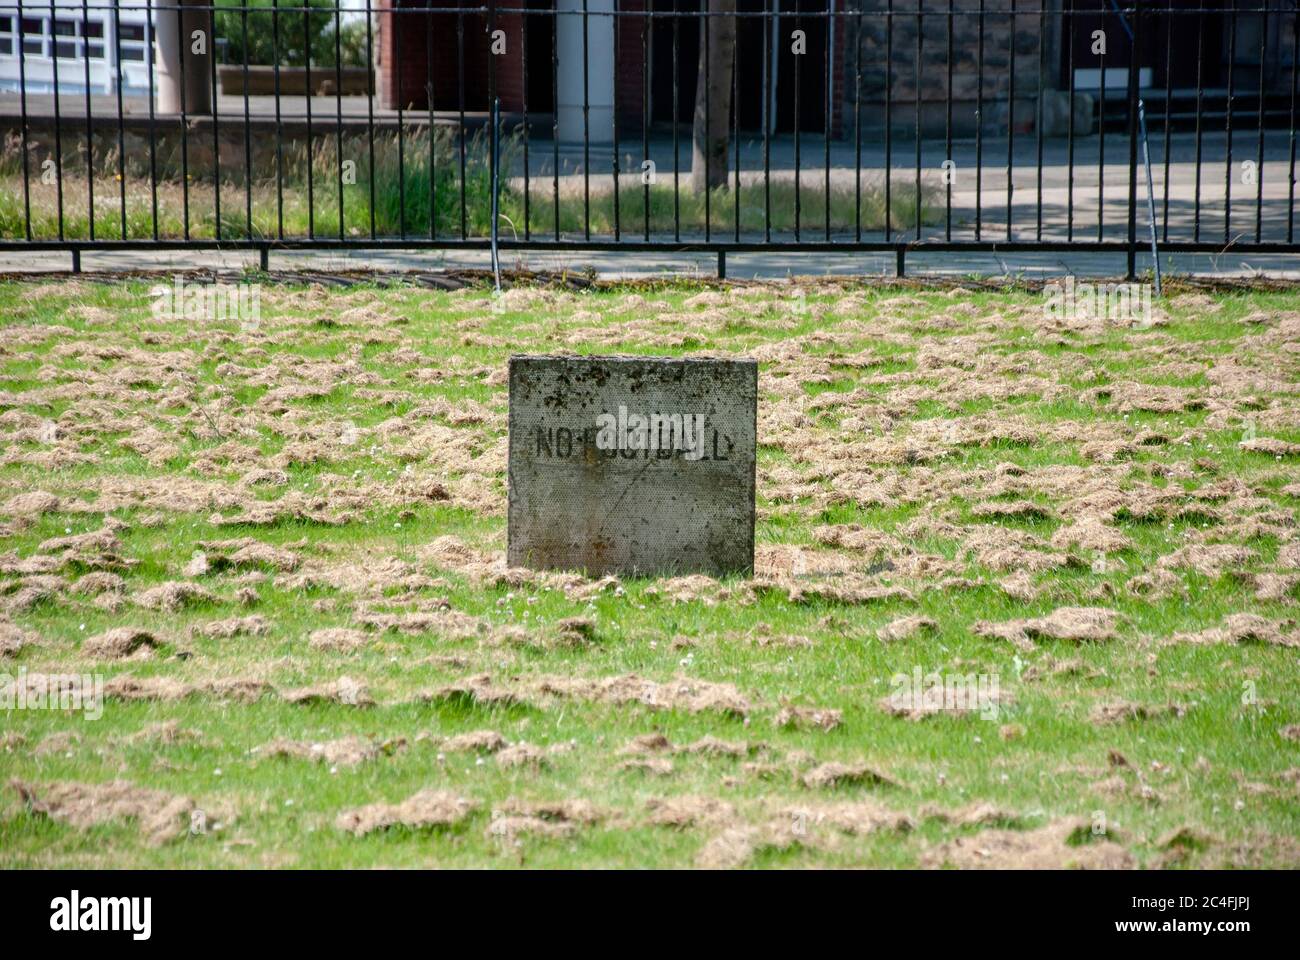 No Football Sign in Field of Grass Glasgow City Centre Scotland United Kingdom grey concrete slab erected in recently cut grass field warning ordering Stock Photo